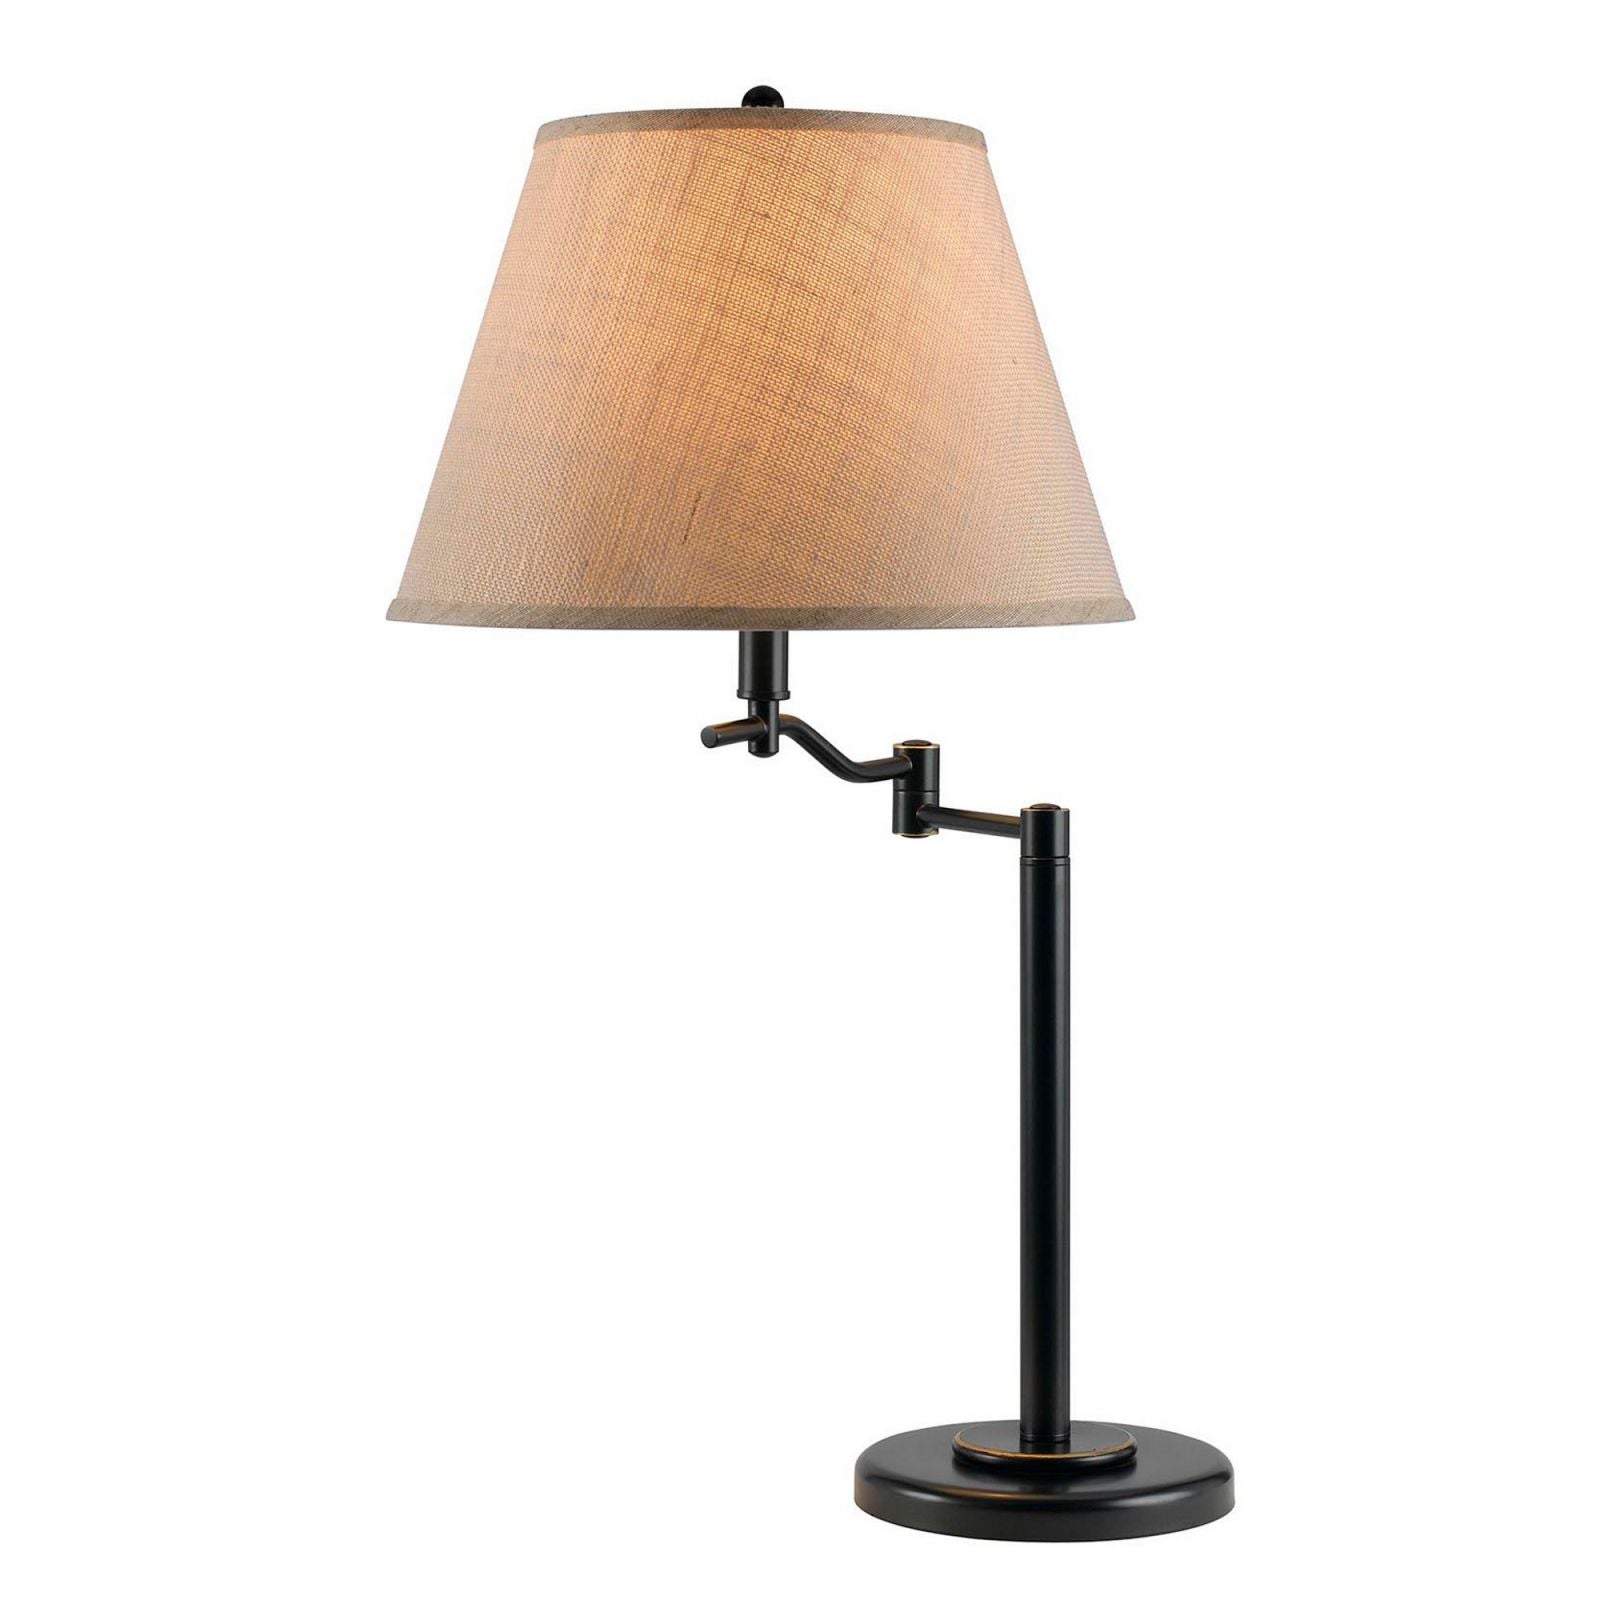 Benzara 3 Way Metal Body Table Lamp With Swing Arm And Conical Fabric Shade, Black By Benzara Table Lamps BM220834